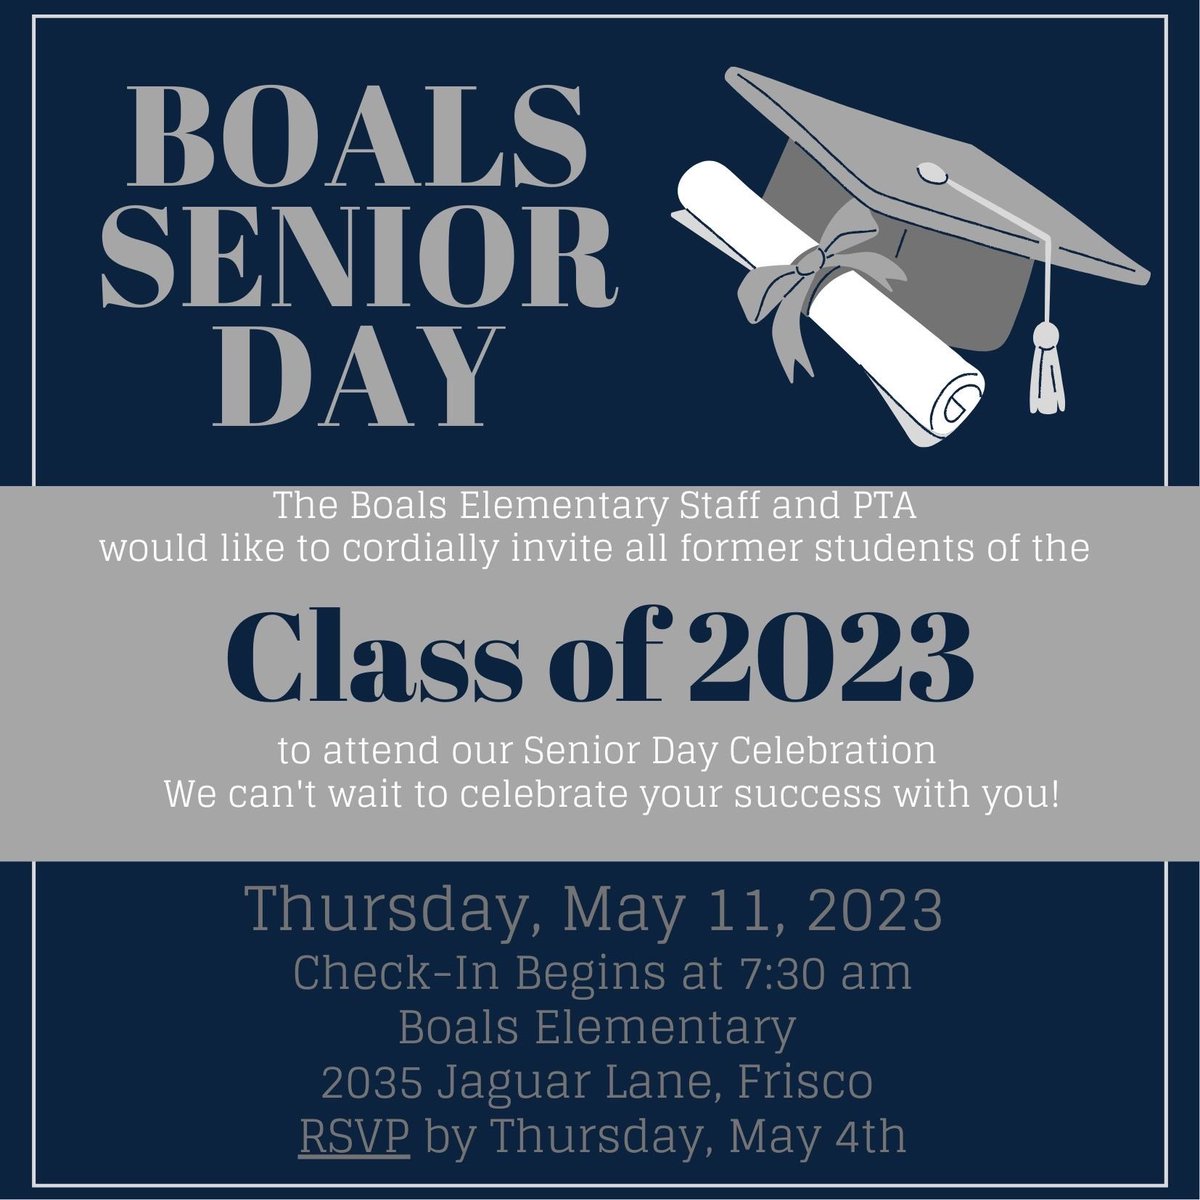 We can’t wait to celebrate with you, Class of 2023!@LSHSRangers, @lshs_classof23